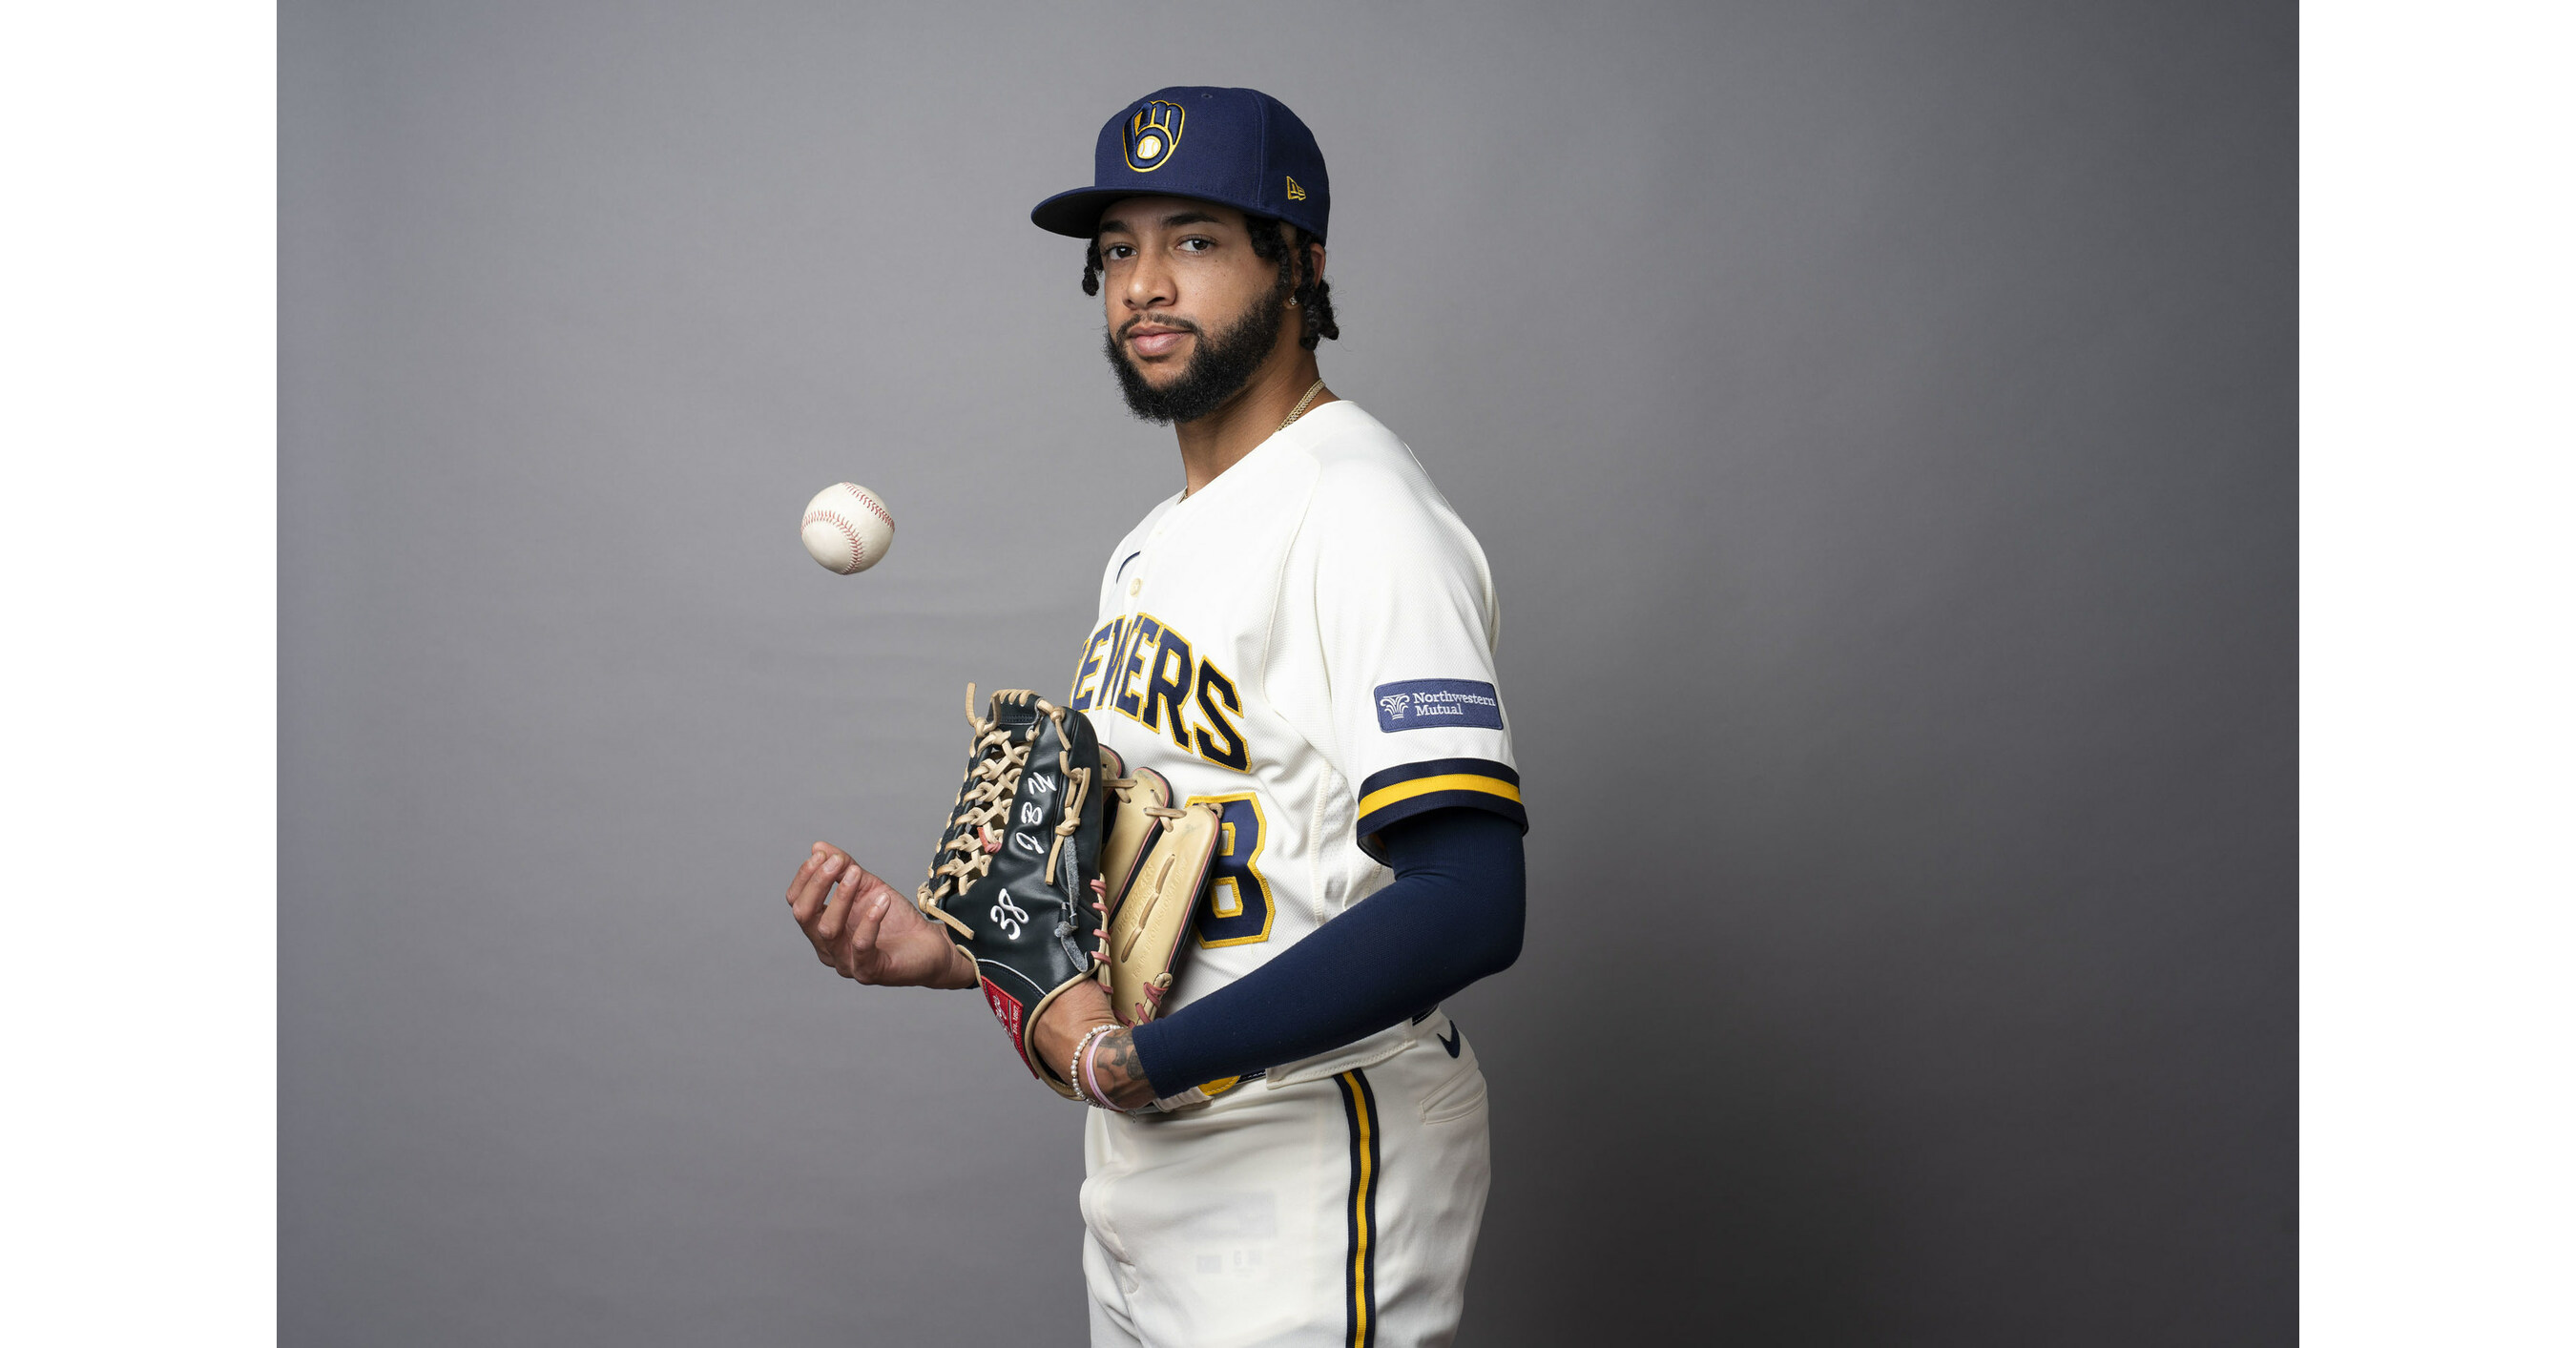 Brewers add Northwestern Mutual patch to sleeves